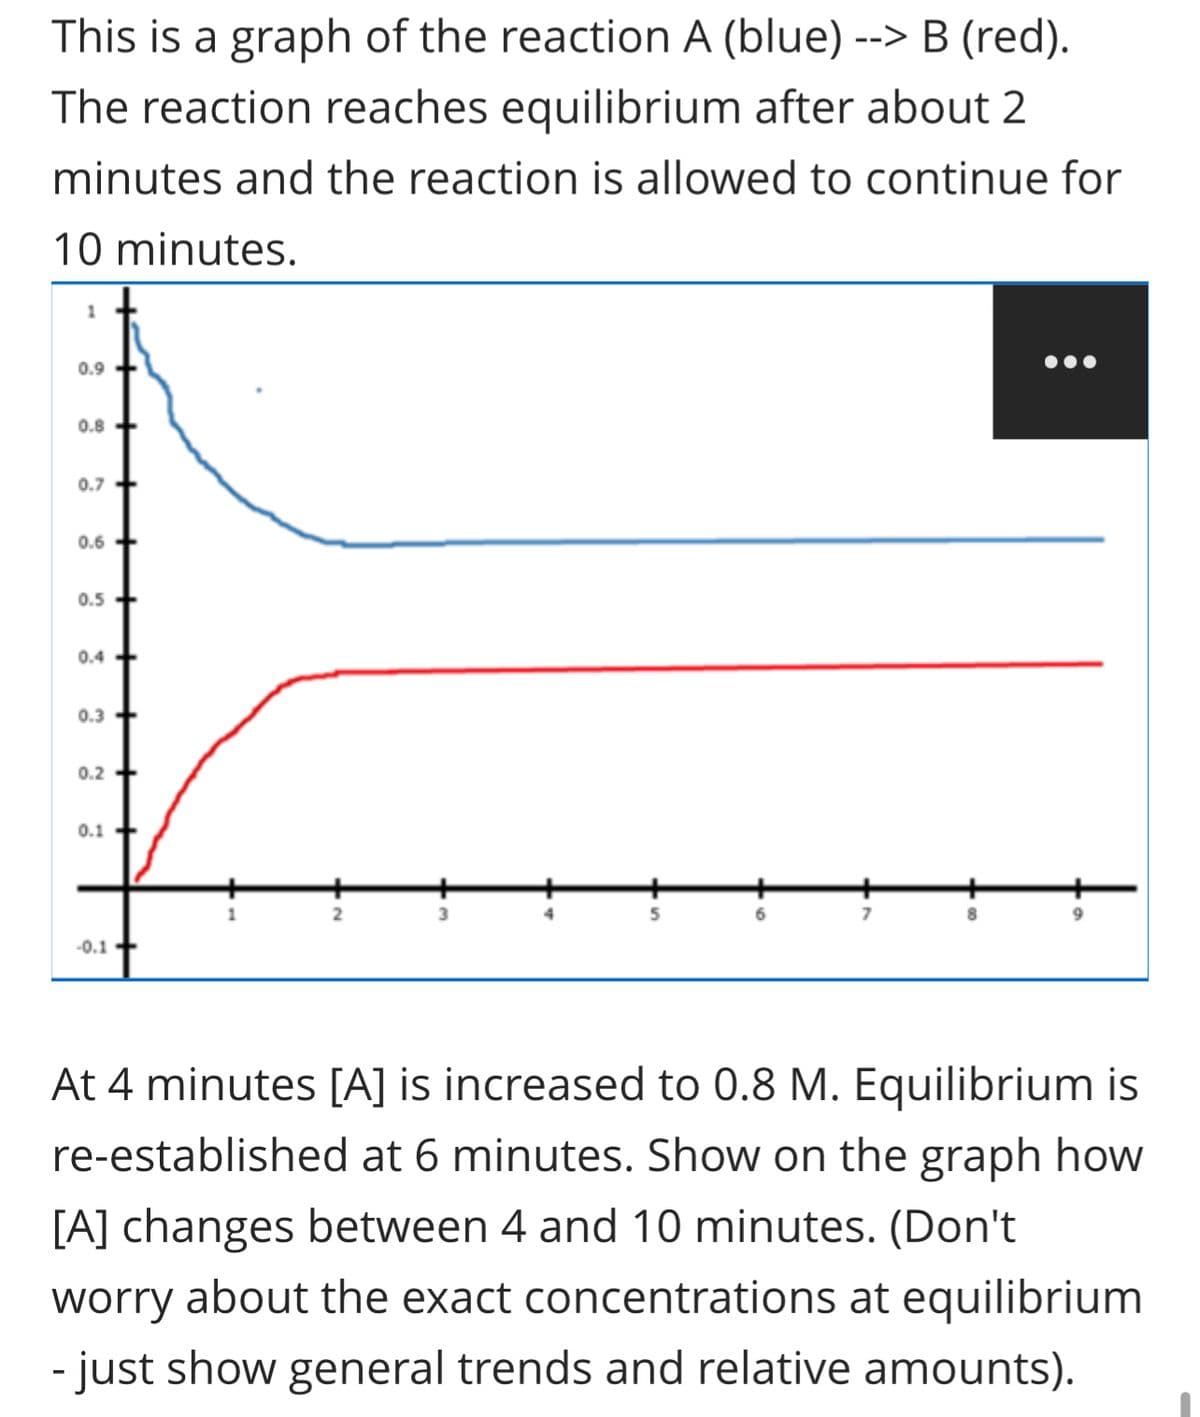 This is a graph of the reaction A (blue) --> B (red).
The reaction reaches equilibrium after about 2
minutes and the reaction is allowed to continue for
10 minutes.
0.9
0.8
0.7+
0.6
0.5
0.4-
0.3+
0.2 +
0.1
-0.1
2
3
5
6
7
9
At 4 minutes [A] is increased to 0.8 M. Equilibrium is
re-established at 6 minutes. Show on the graph how
[A] changes between 4 and 10 minutes. (Don't
worry about the exact concentrations at equilibrium
- just show general trends and relative amounts).